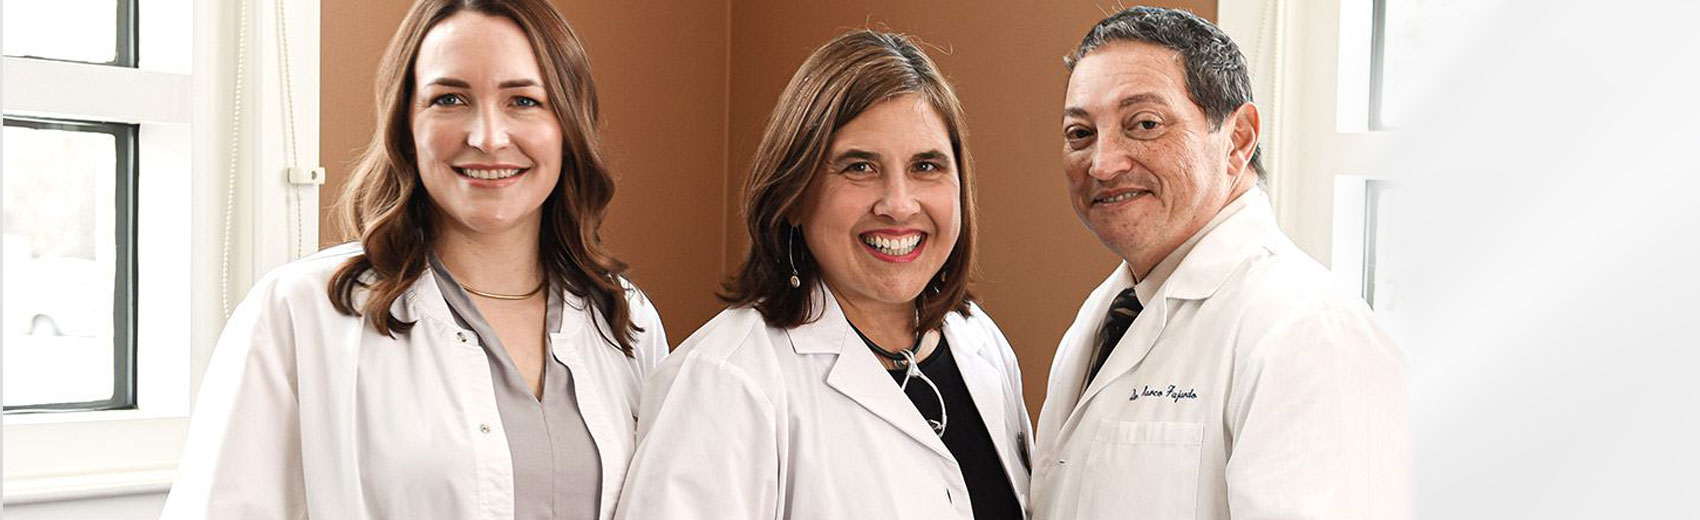 Meet the Doctors, West Suburban Oral Health Care